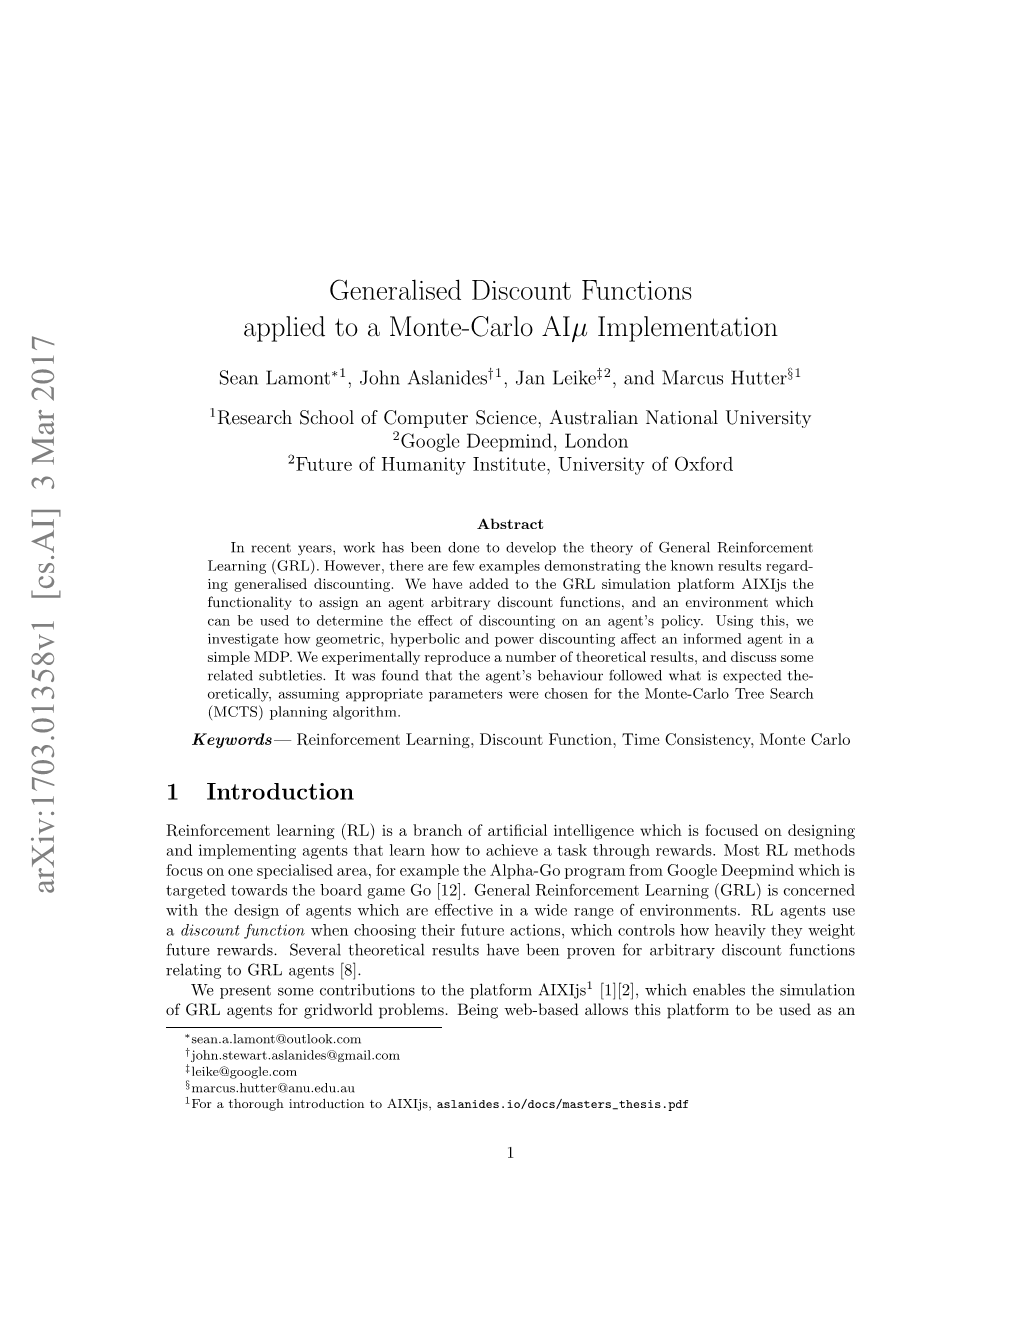 Generalised Discount Functions Applied to a Monte-Carlo Aiμ Implementation